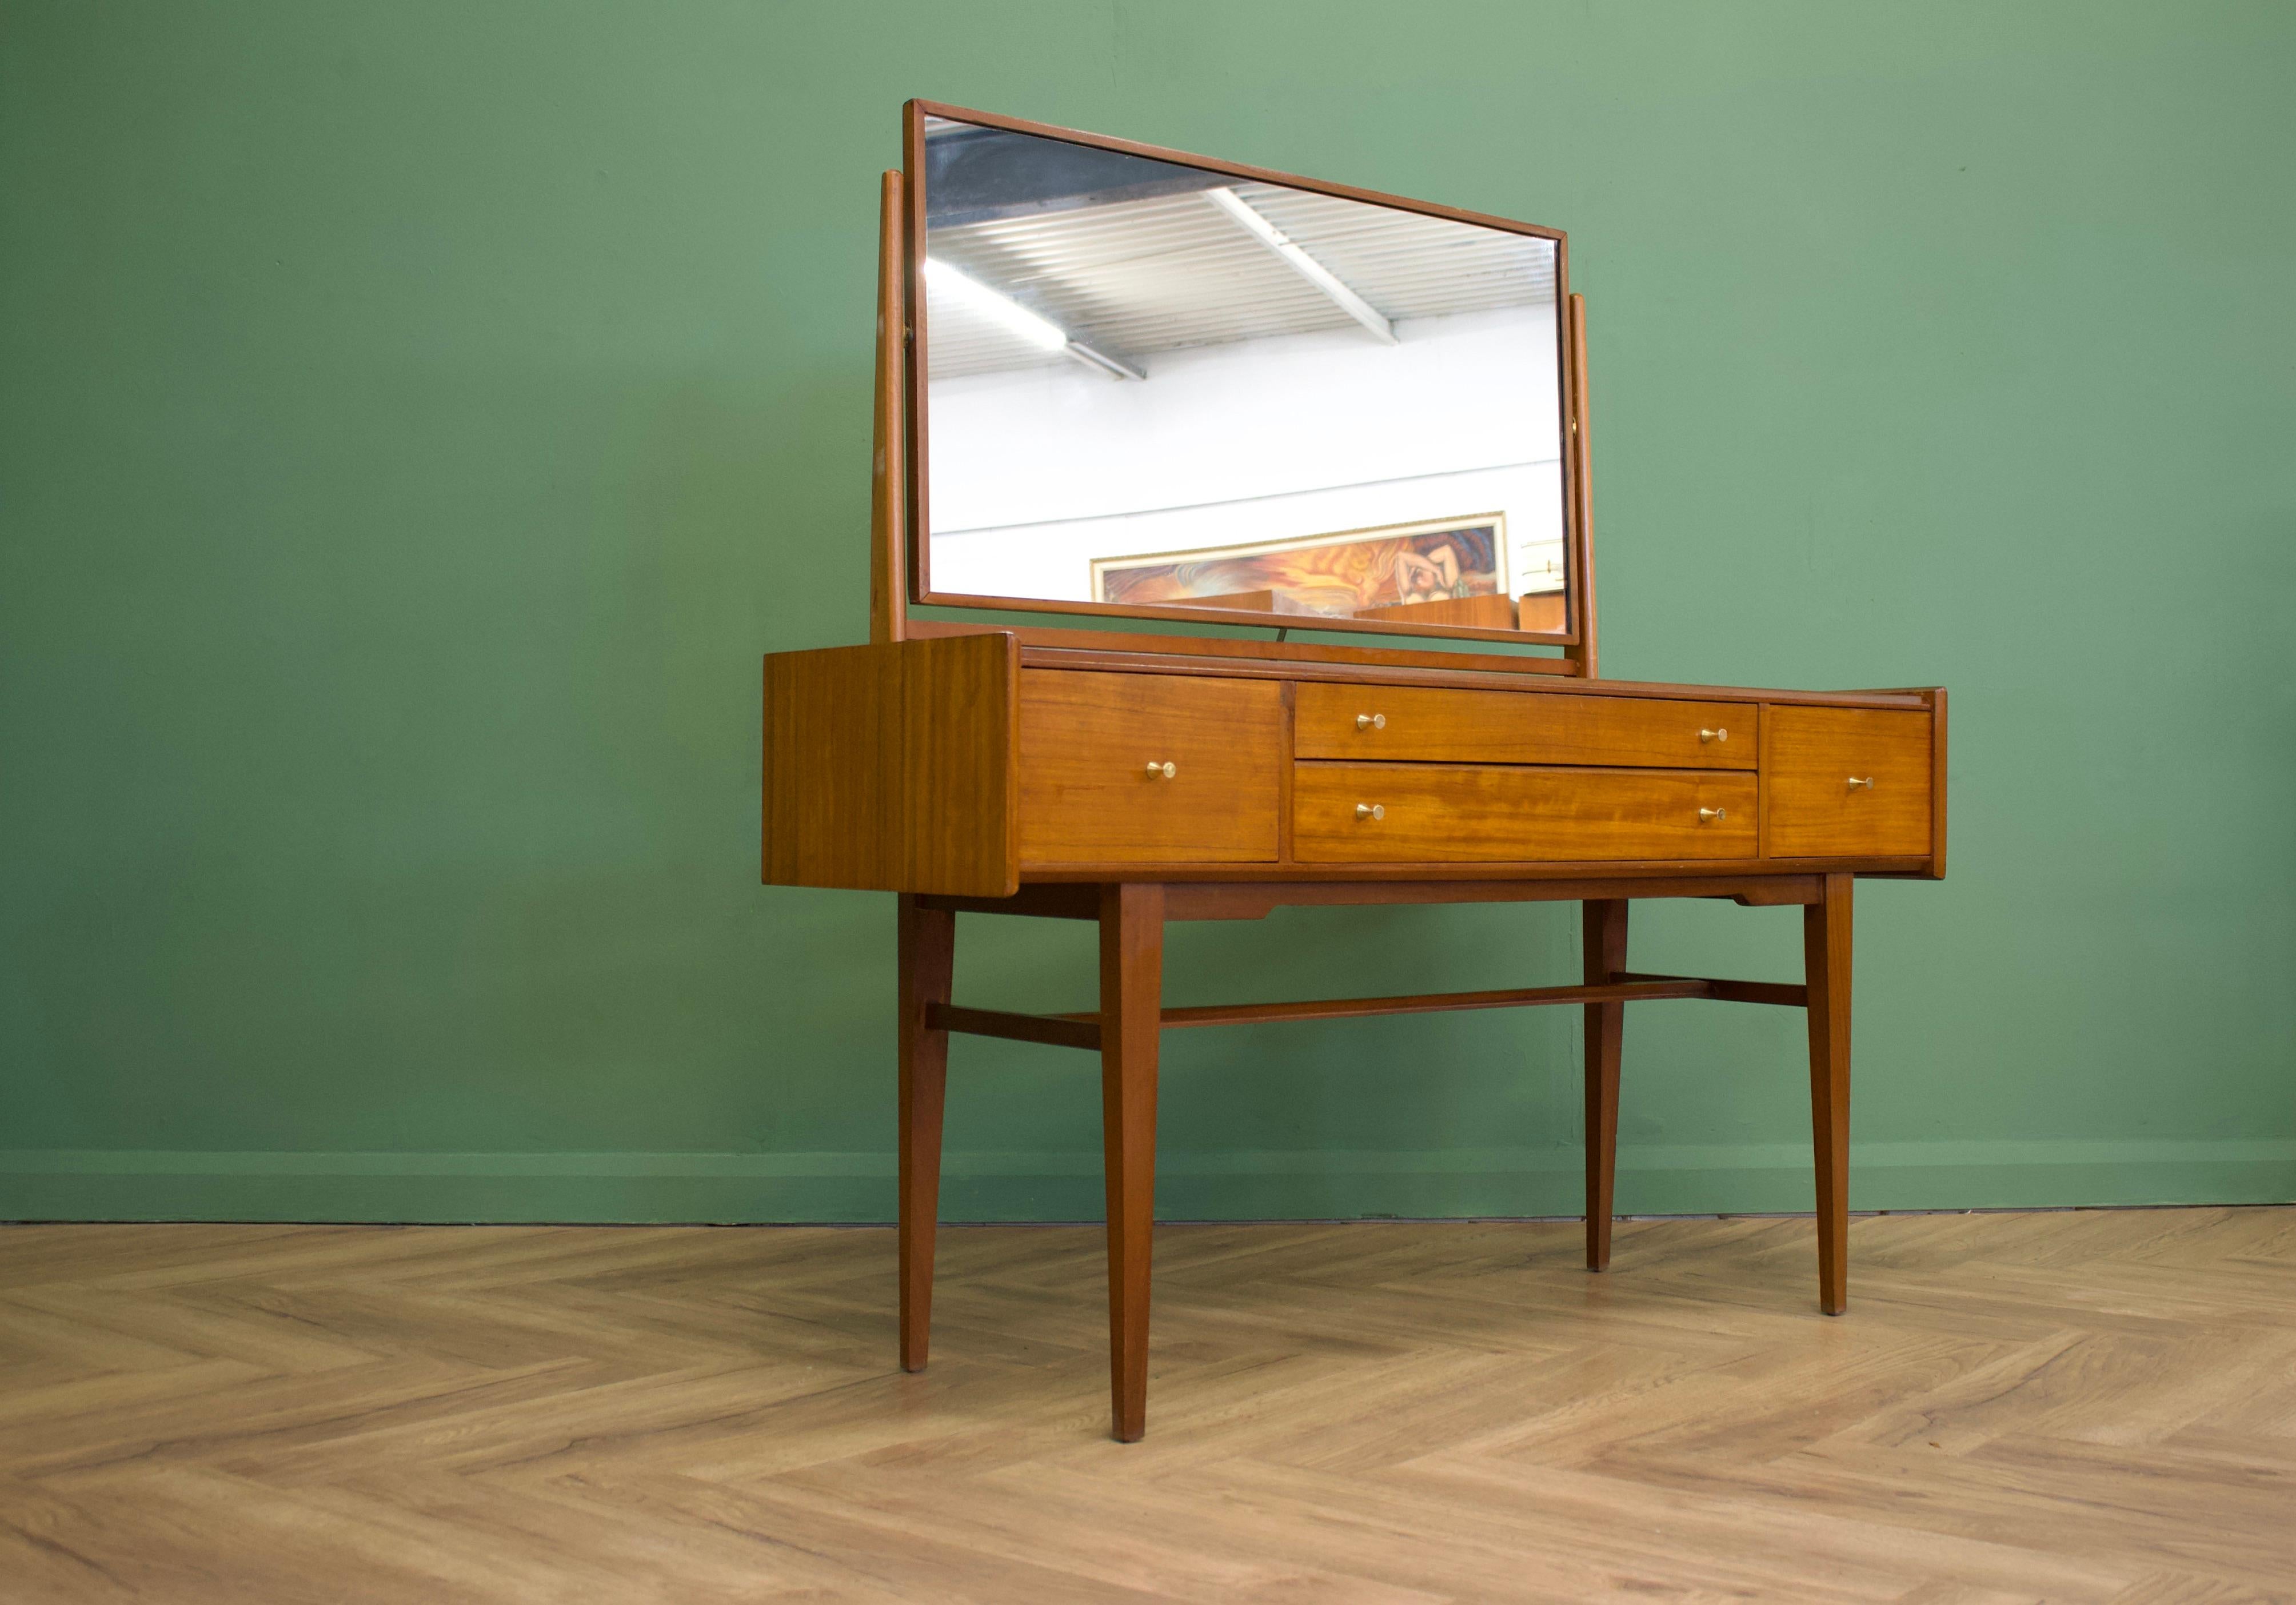 - Mid-century dressing table from Younger
- Manufactured in the UK.

- Made from walnut & walnut Veneer.

- Featuring 4 drawers 

- Height including mirror is 136.5cm.